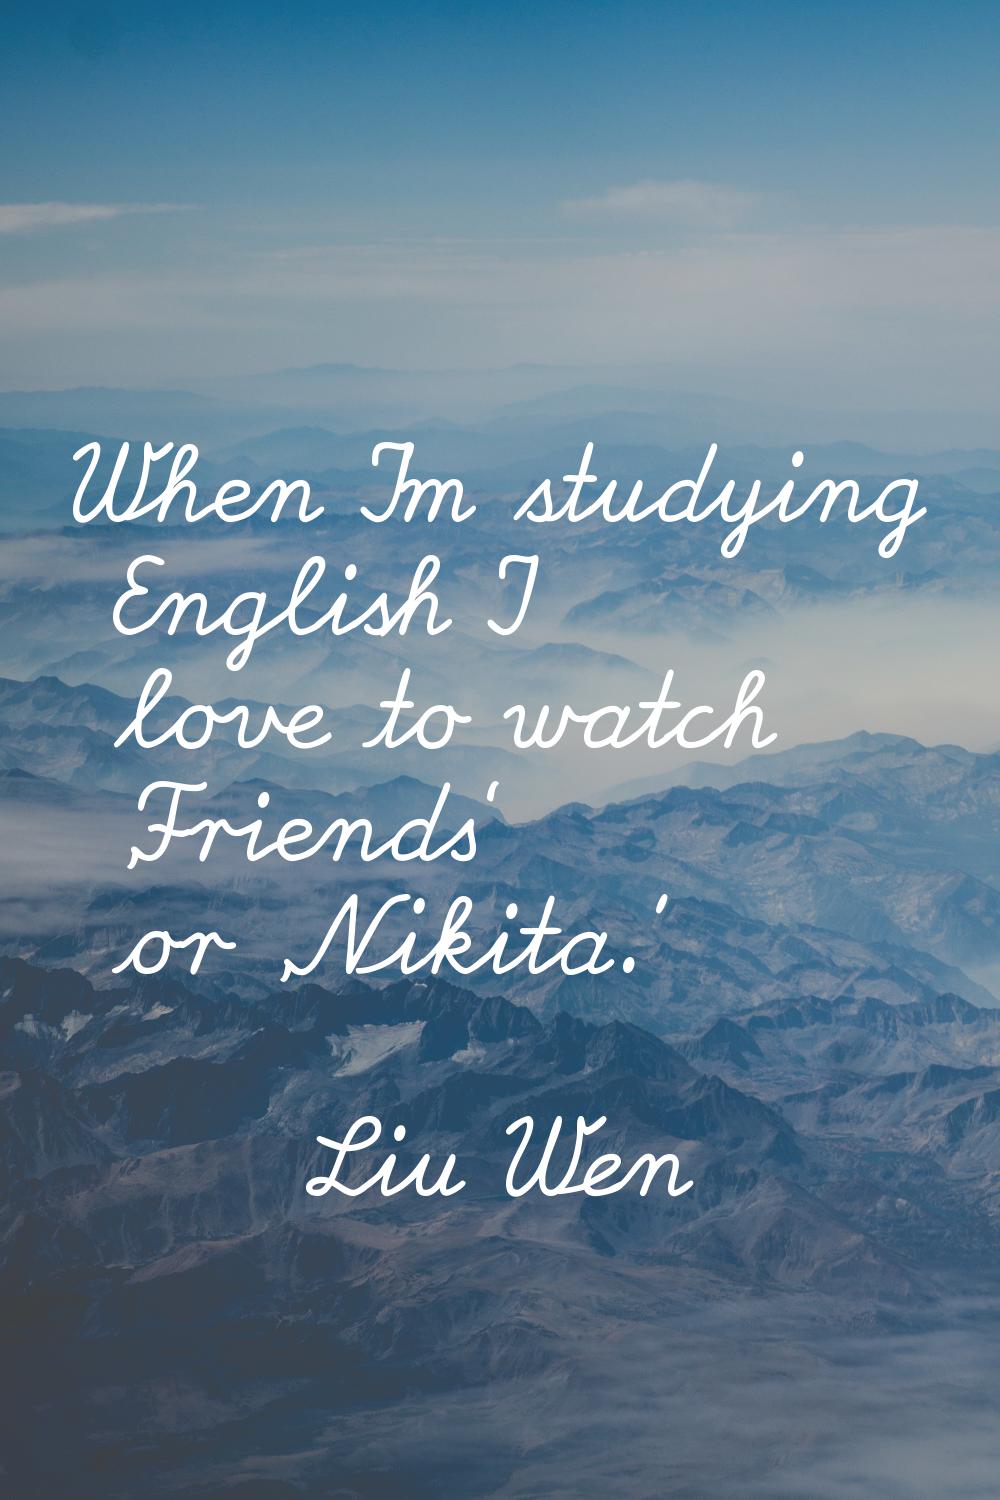 When I'm studying English I love to watch 'Friends' or 'Nikita.'